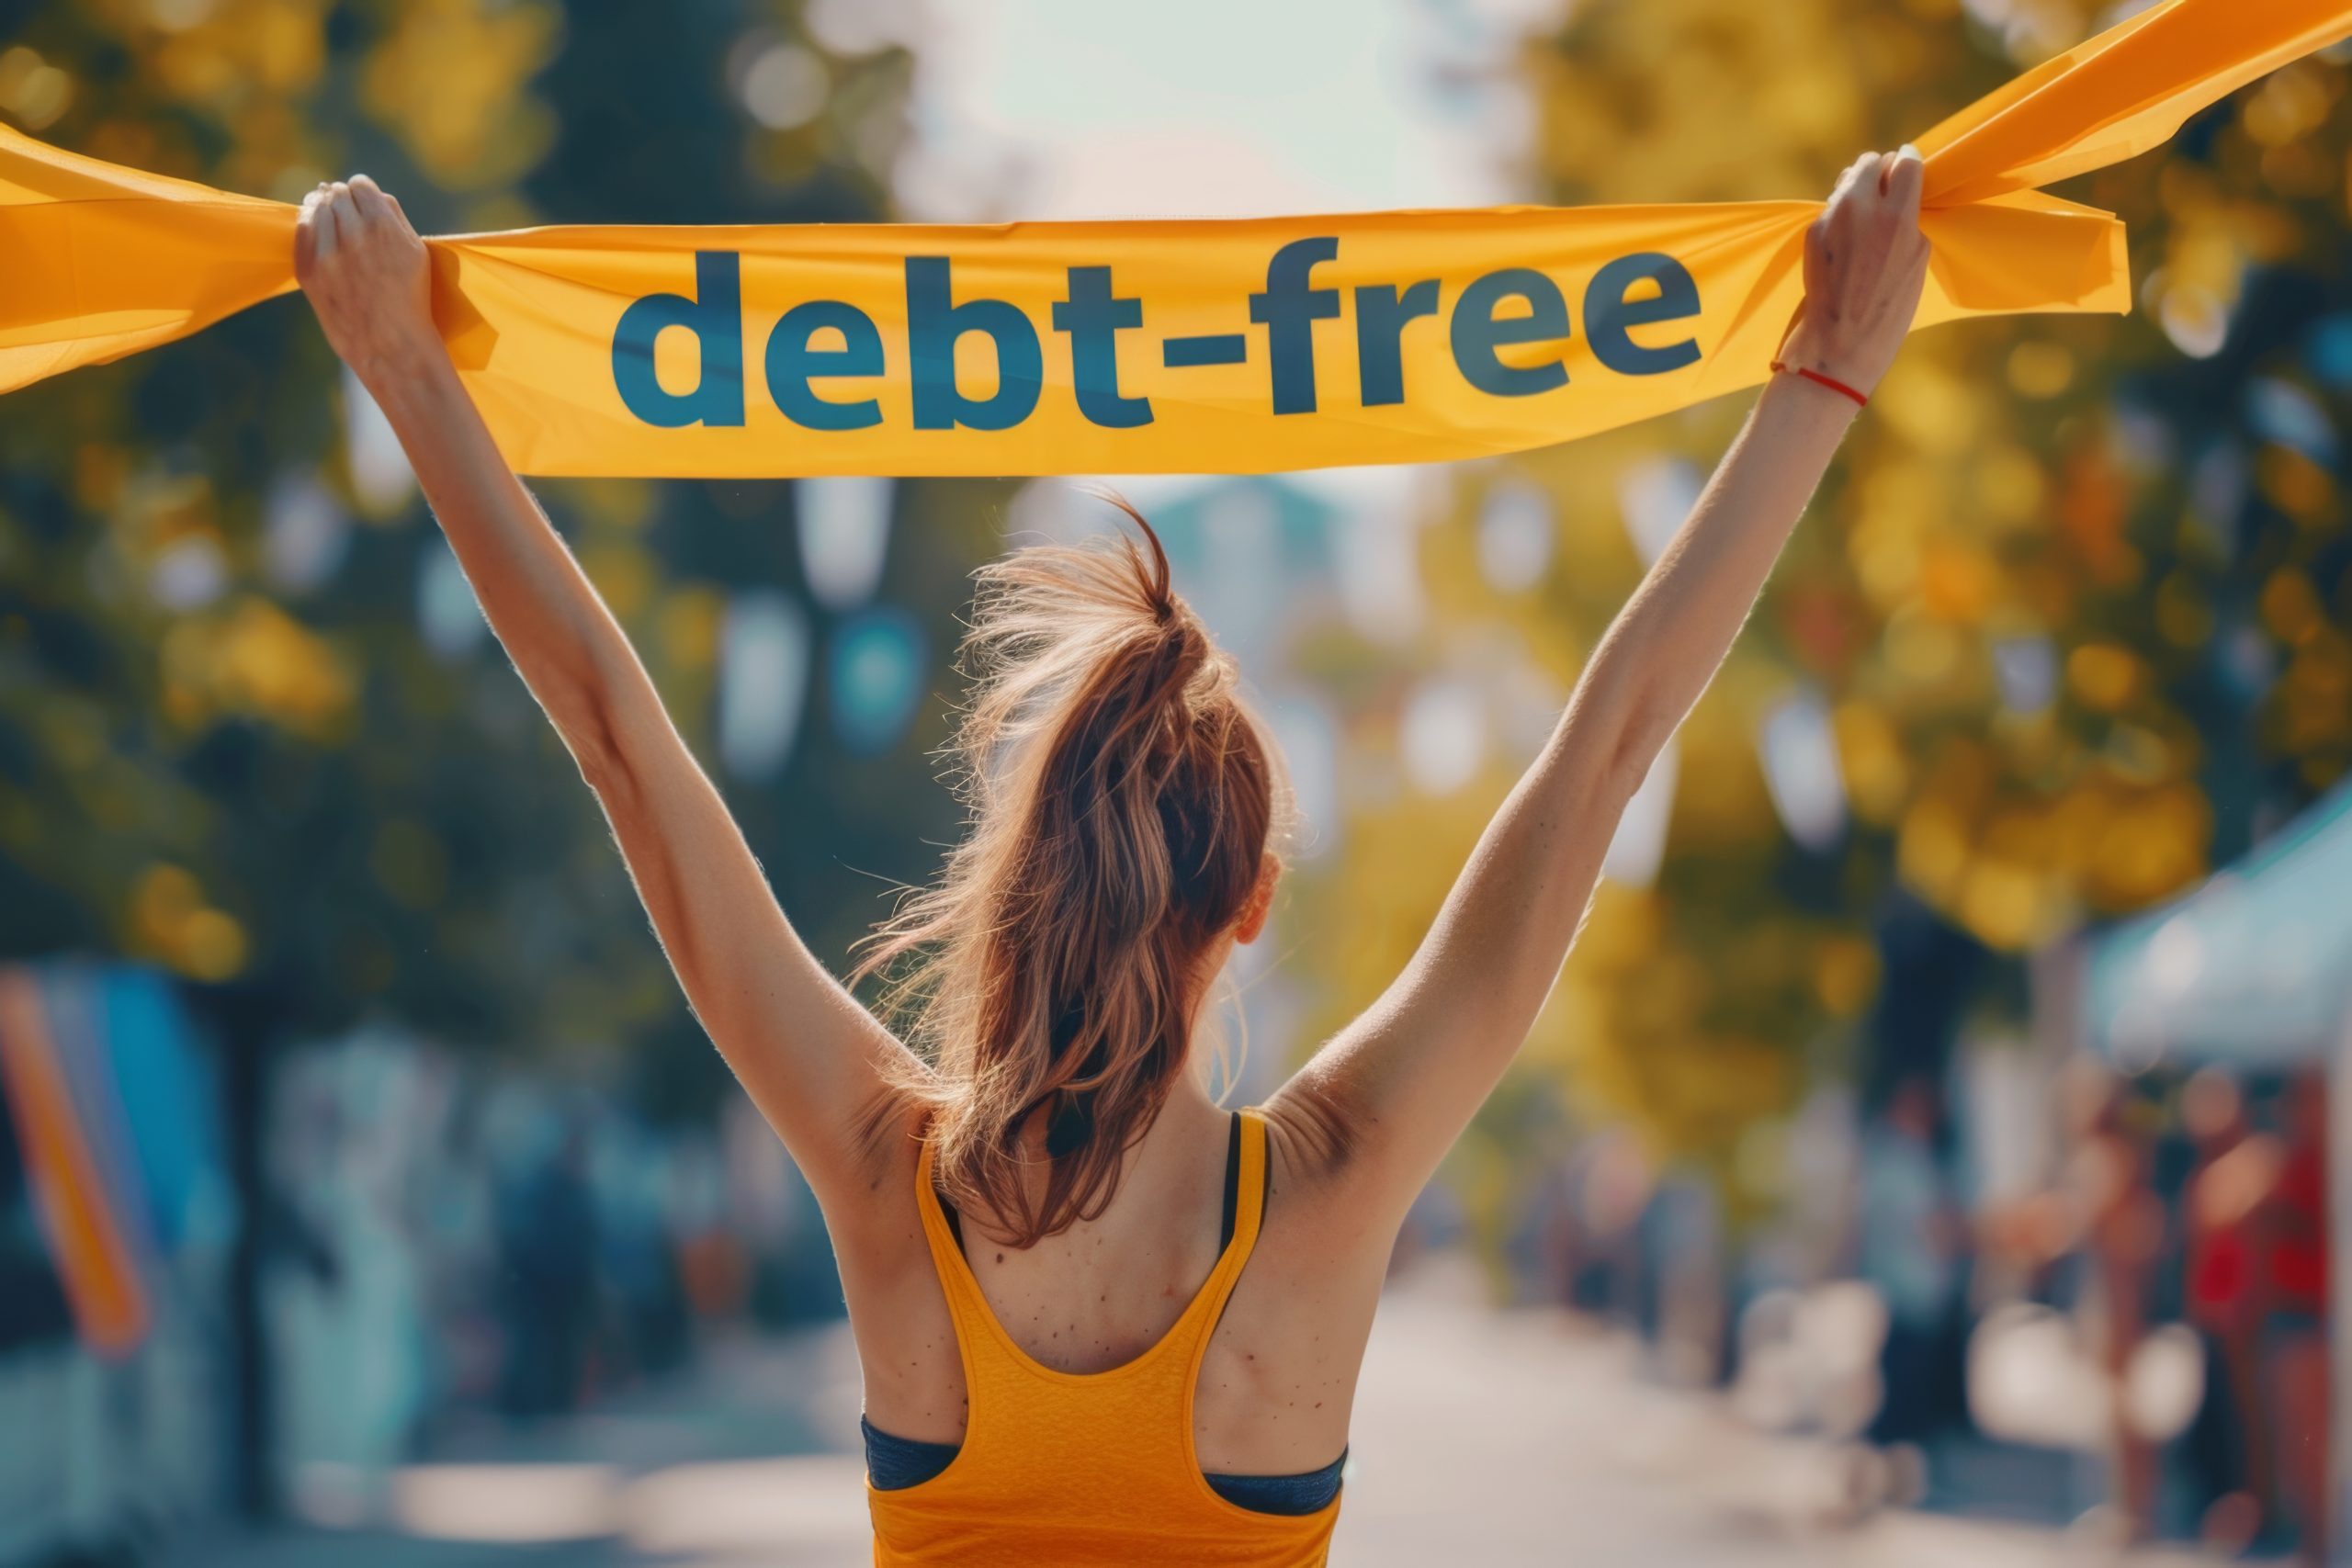 A person crossing the finish line of a race with "debt-free" as the ultimate goal.